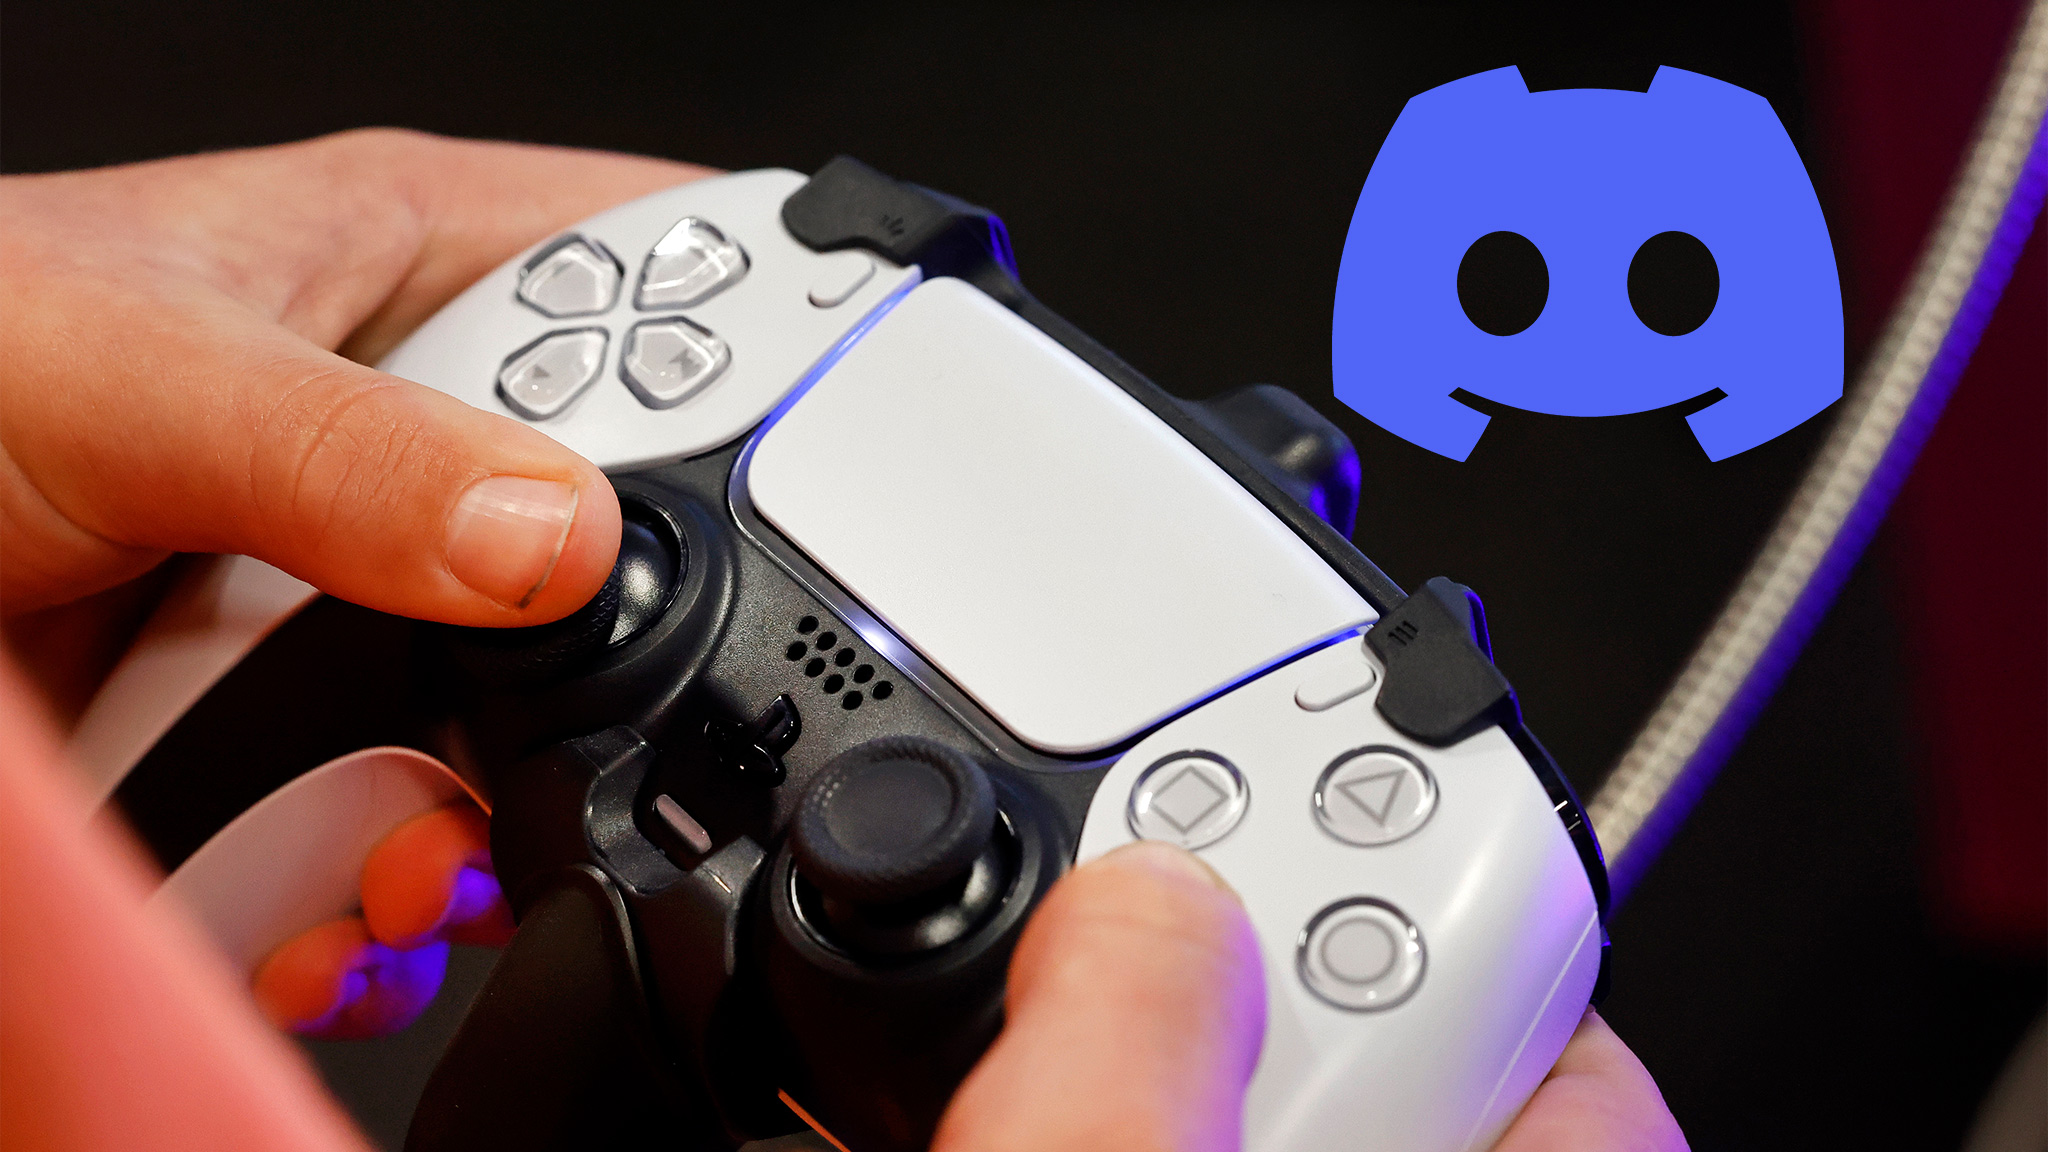 PS5: The update should bring cloud gaming and Discord